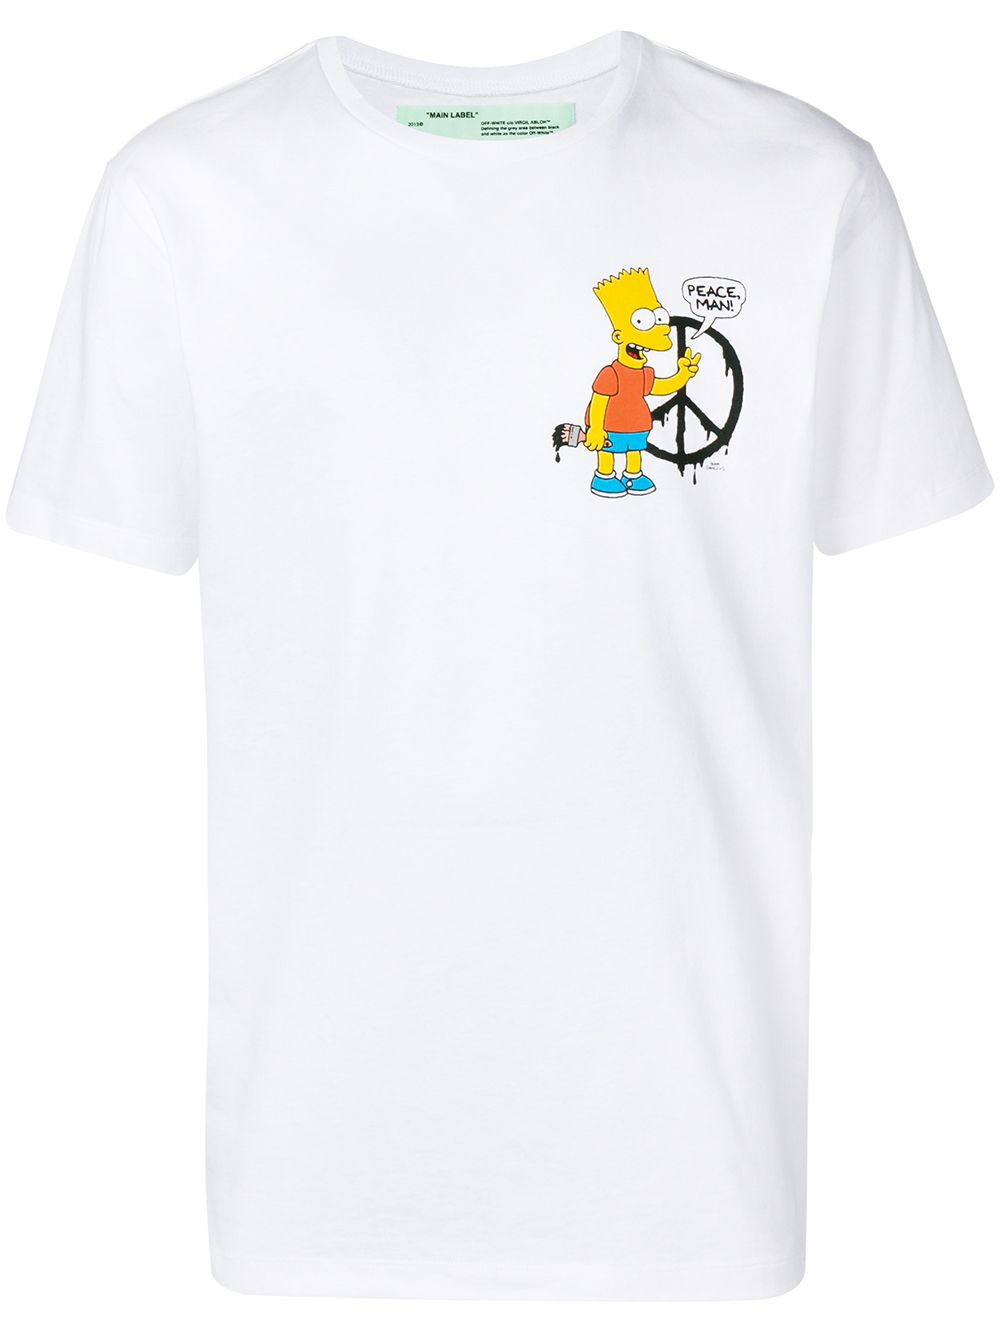 Off-White Bart Simpson print T-shirt $390 - Buy Online SS19 - Quick ...